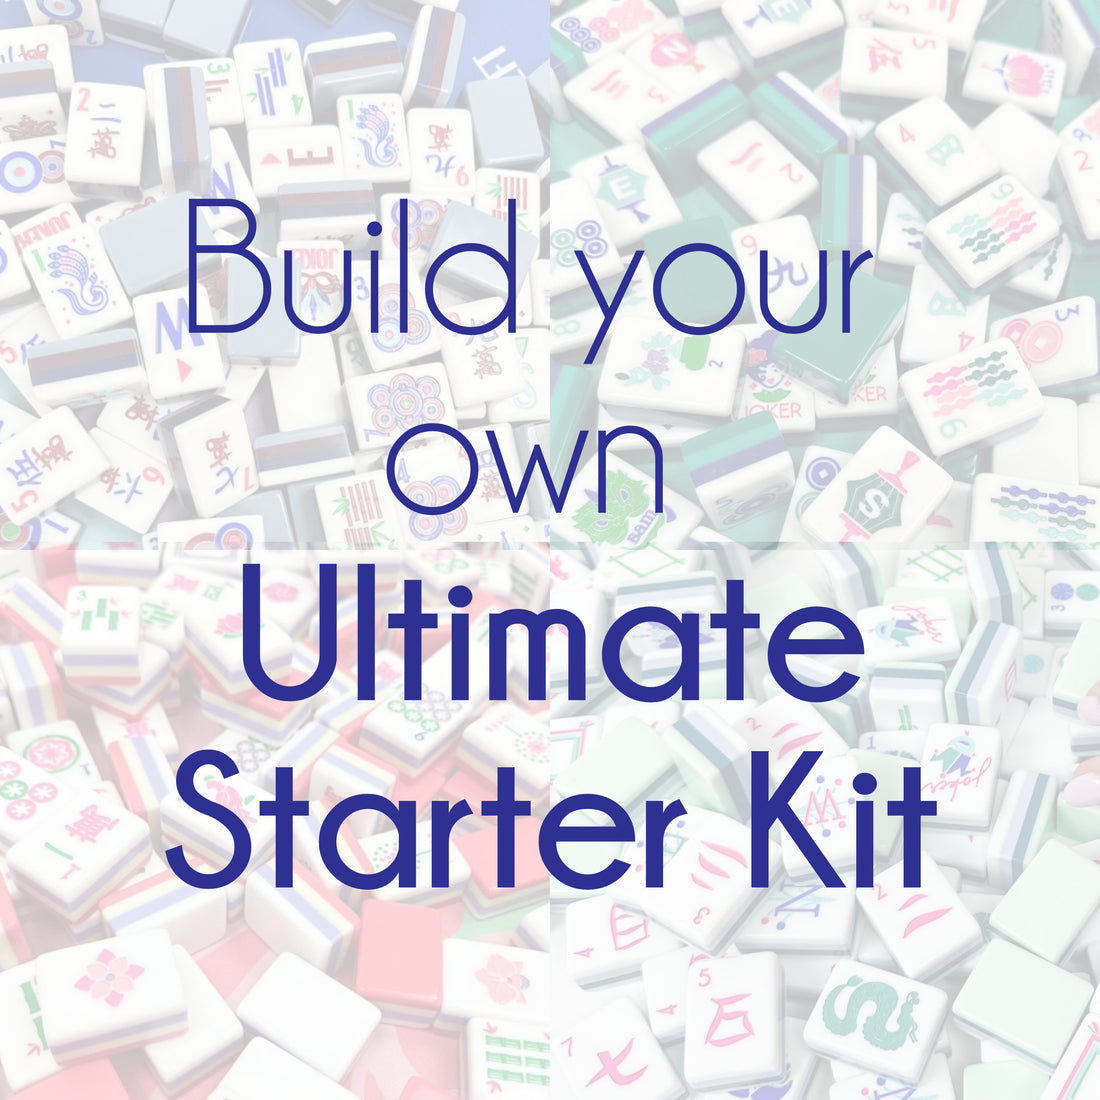 Build your own Ultimate Starter Kit - Oh My Mahjong